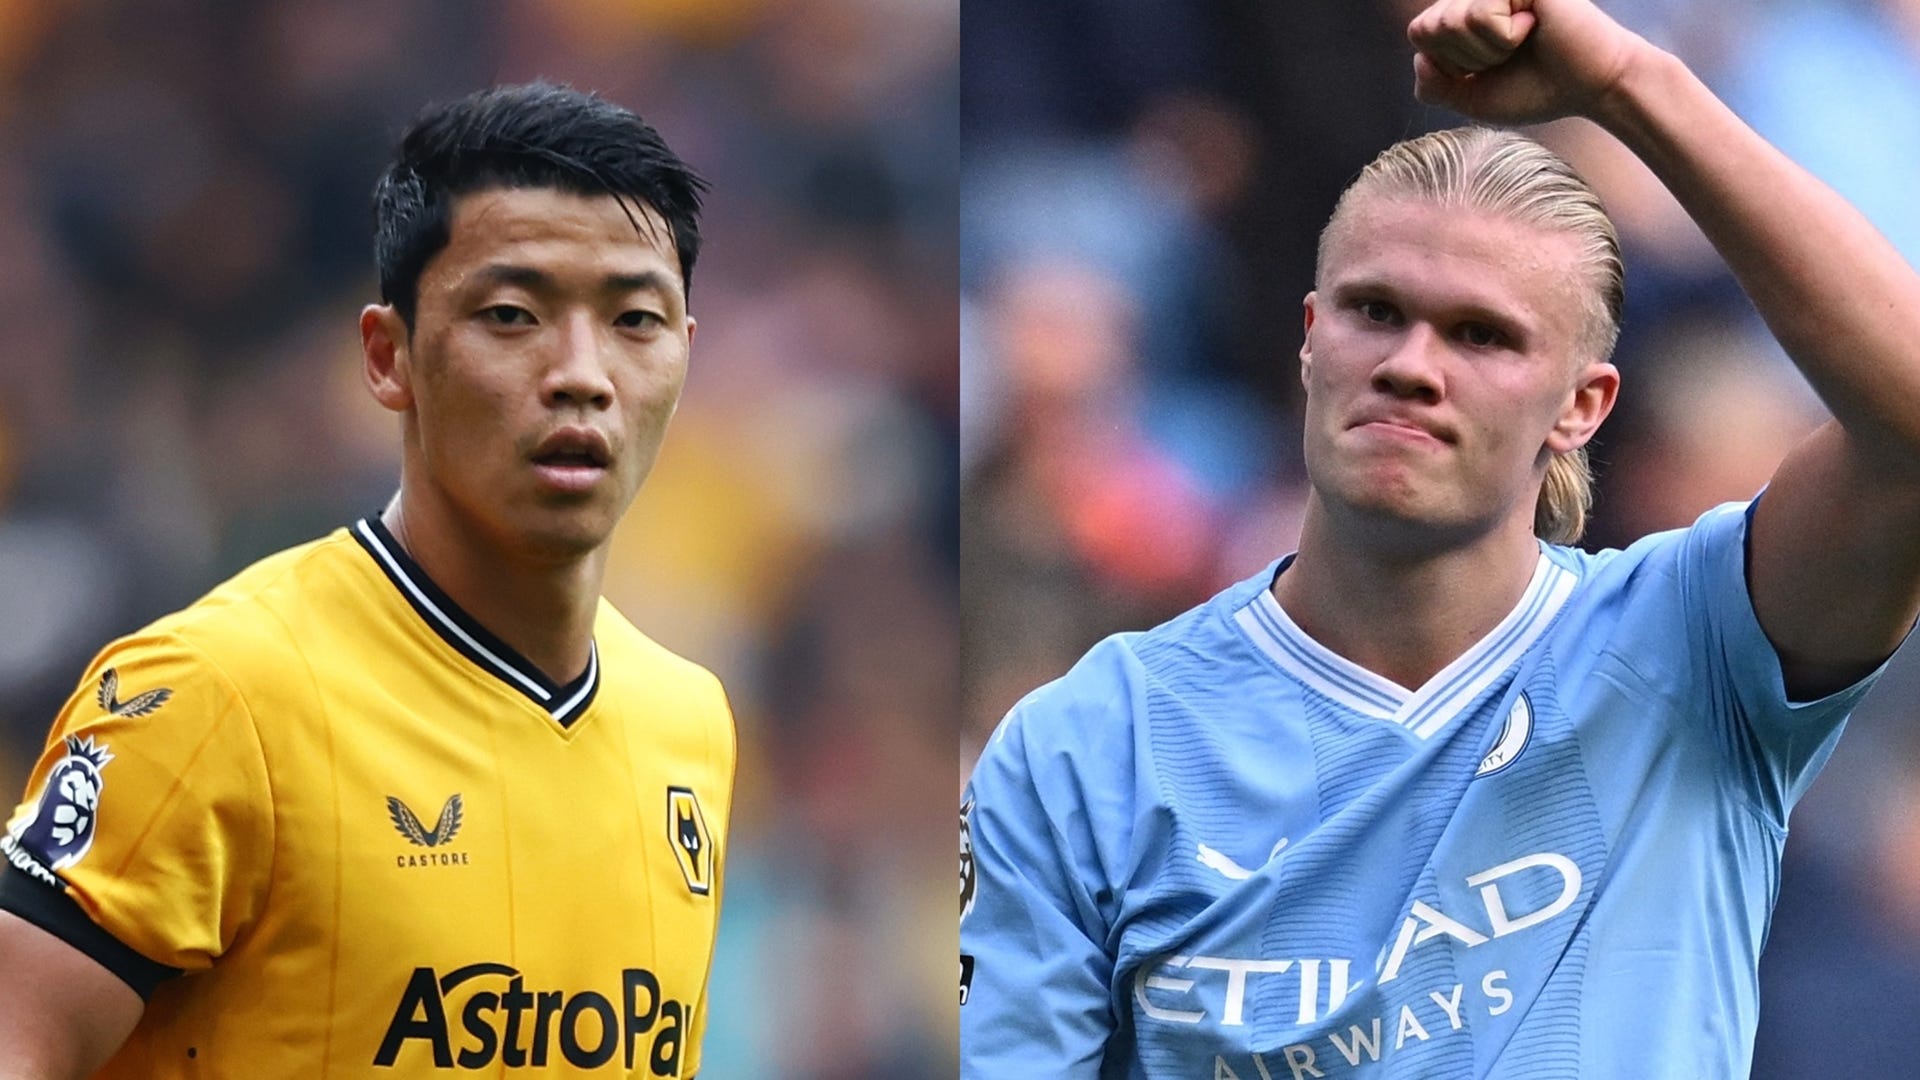 Wolves vs Man City Where to watch the match online, live stream, TV channels and kick-off time Goal US